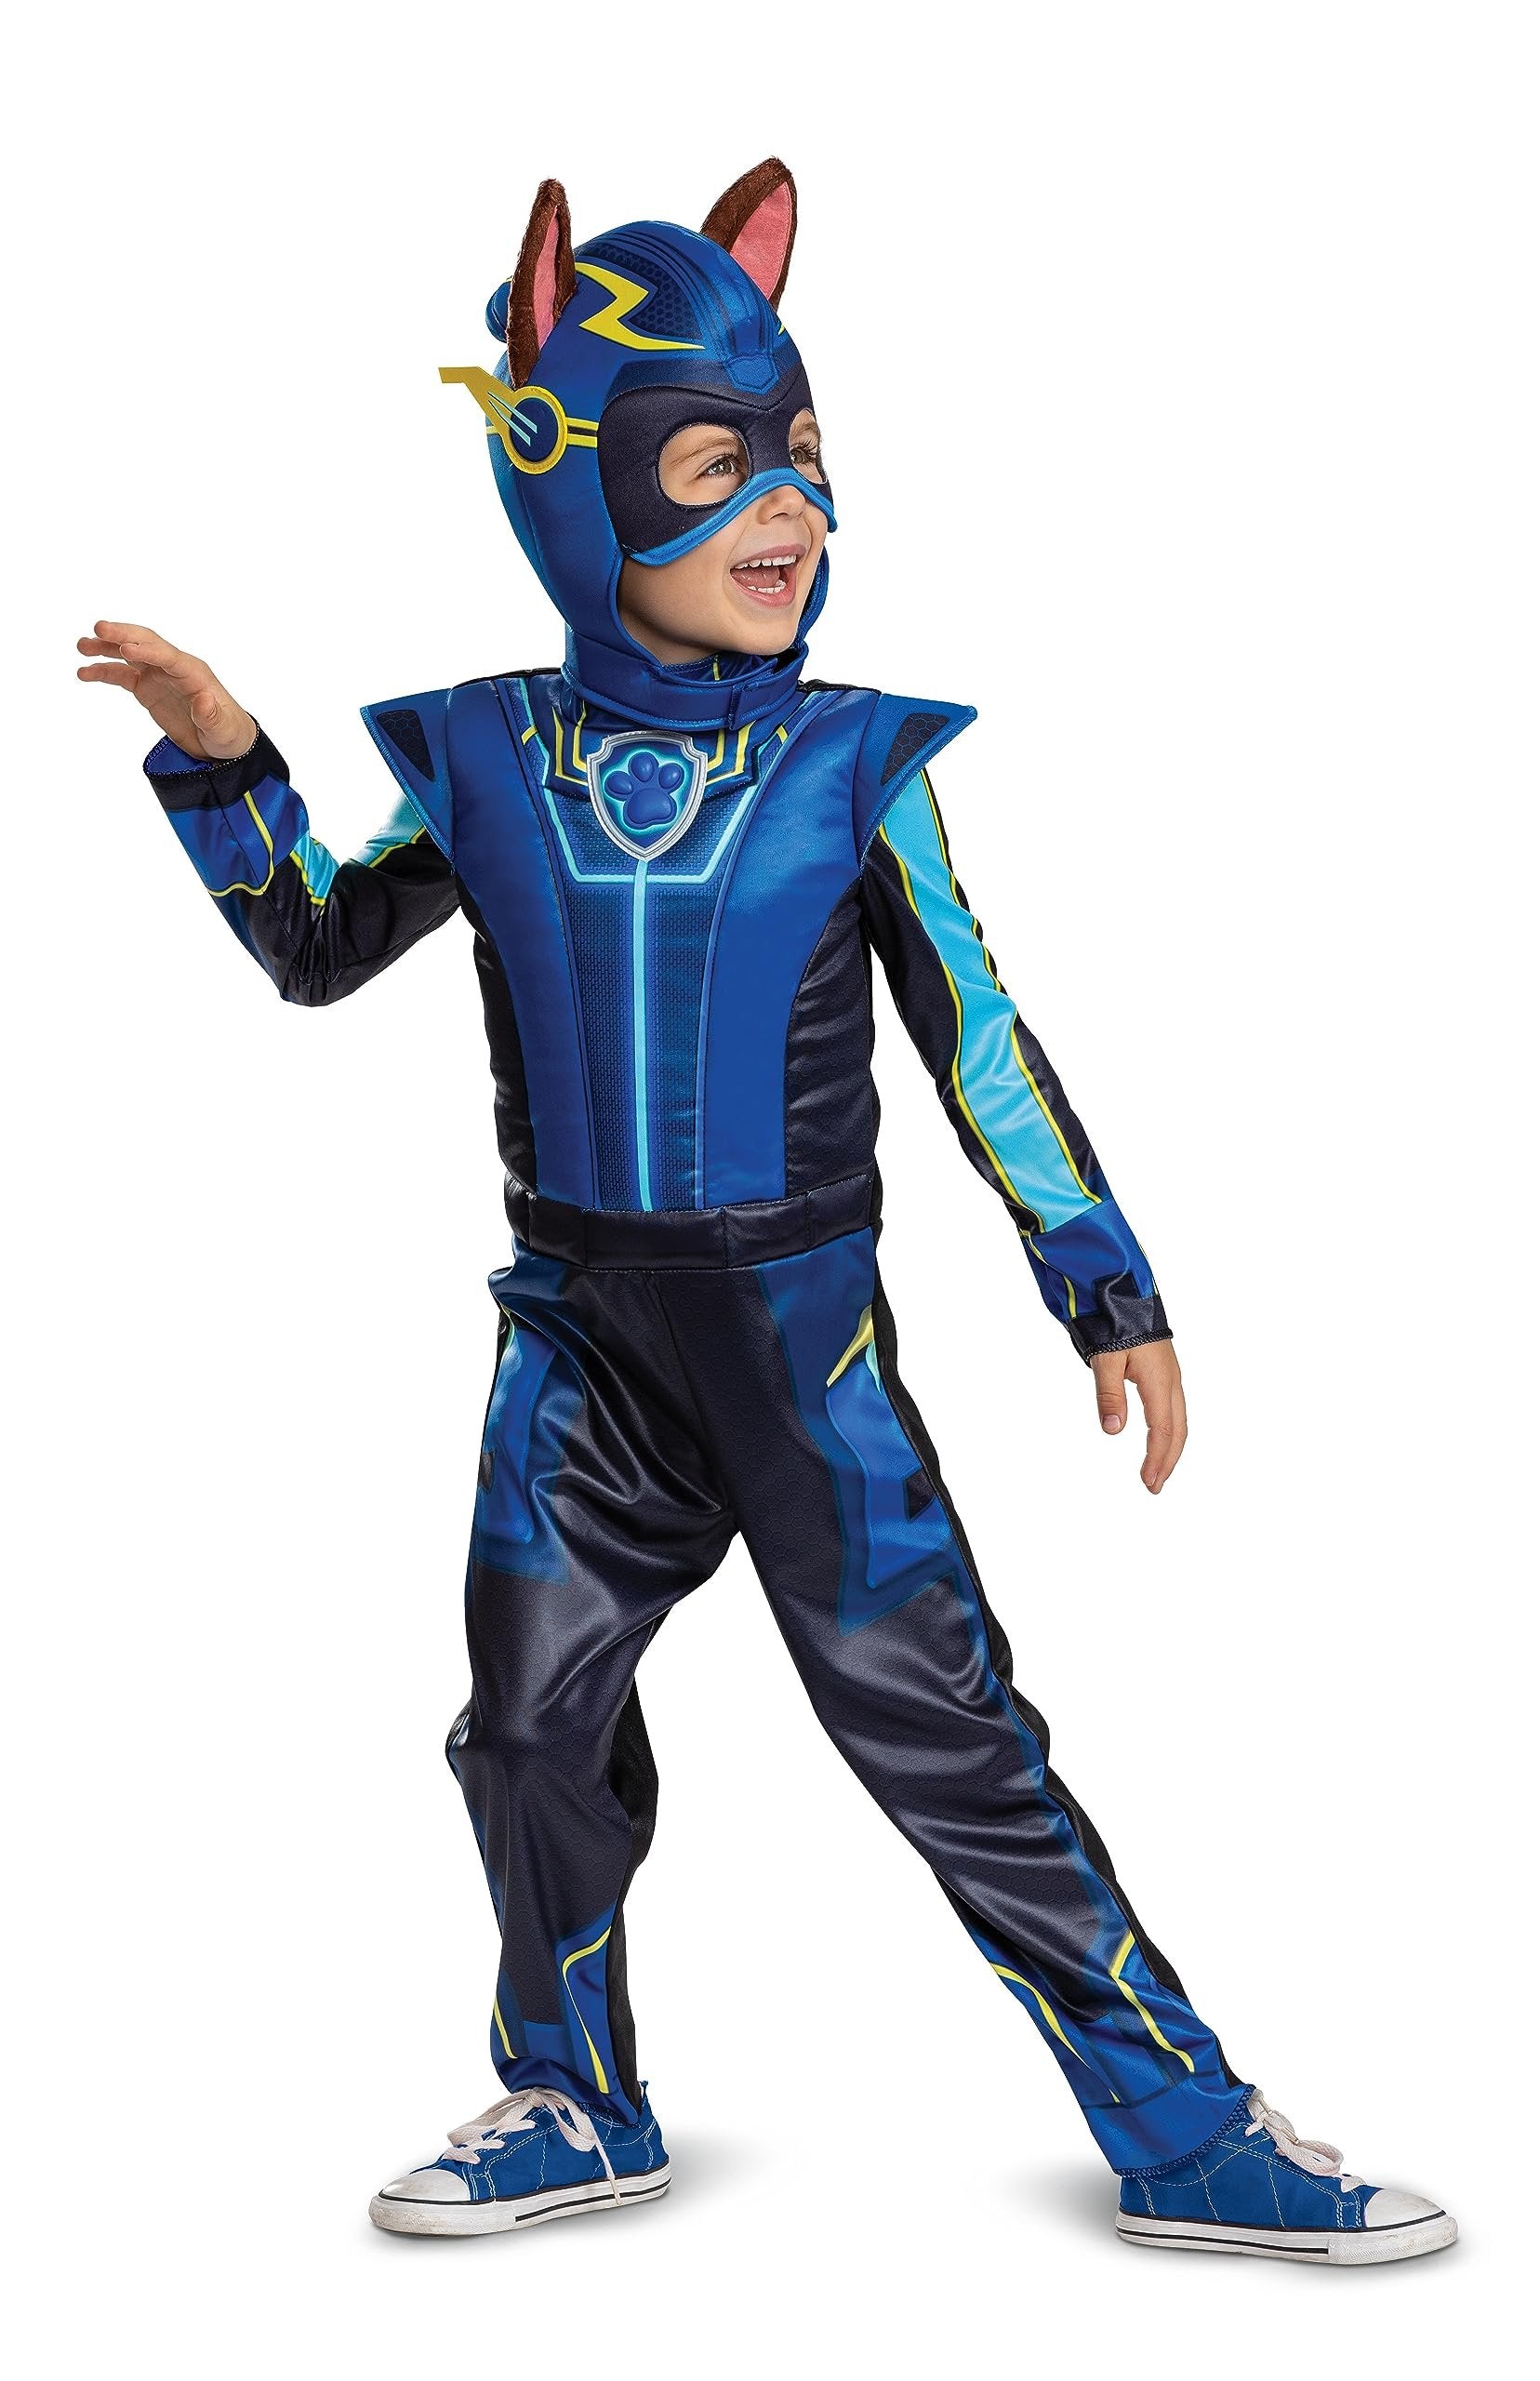 Chase Deluxe Toddler Costume, Official Paw Patrol Halloween Outfit with Armor and Headpiece for Kids, Size (3T-4T)